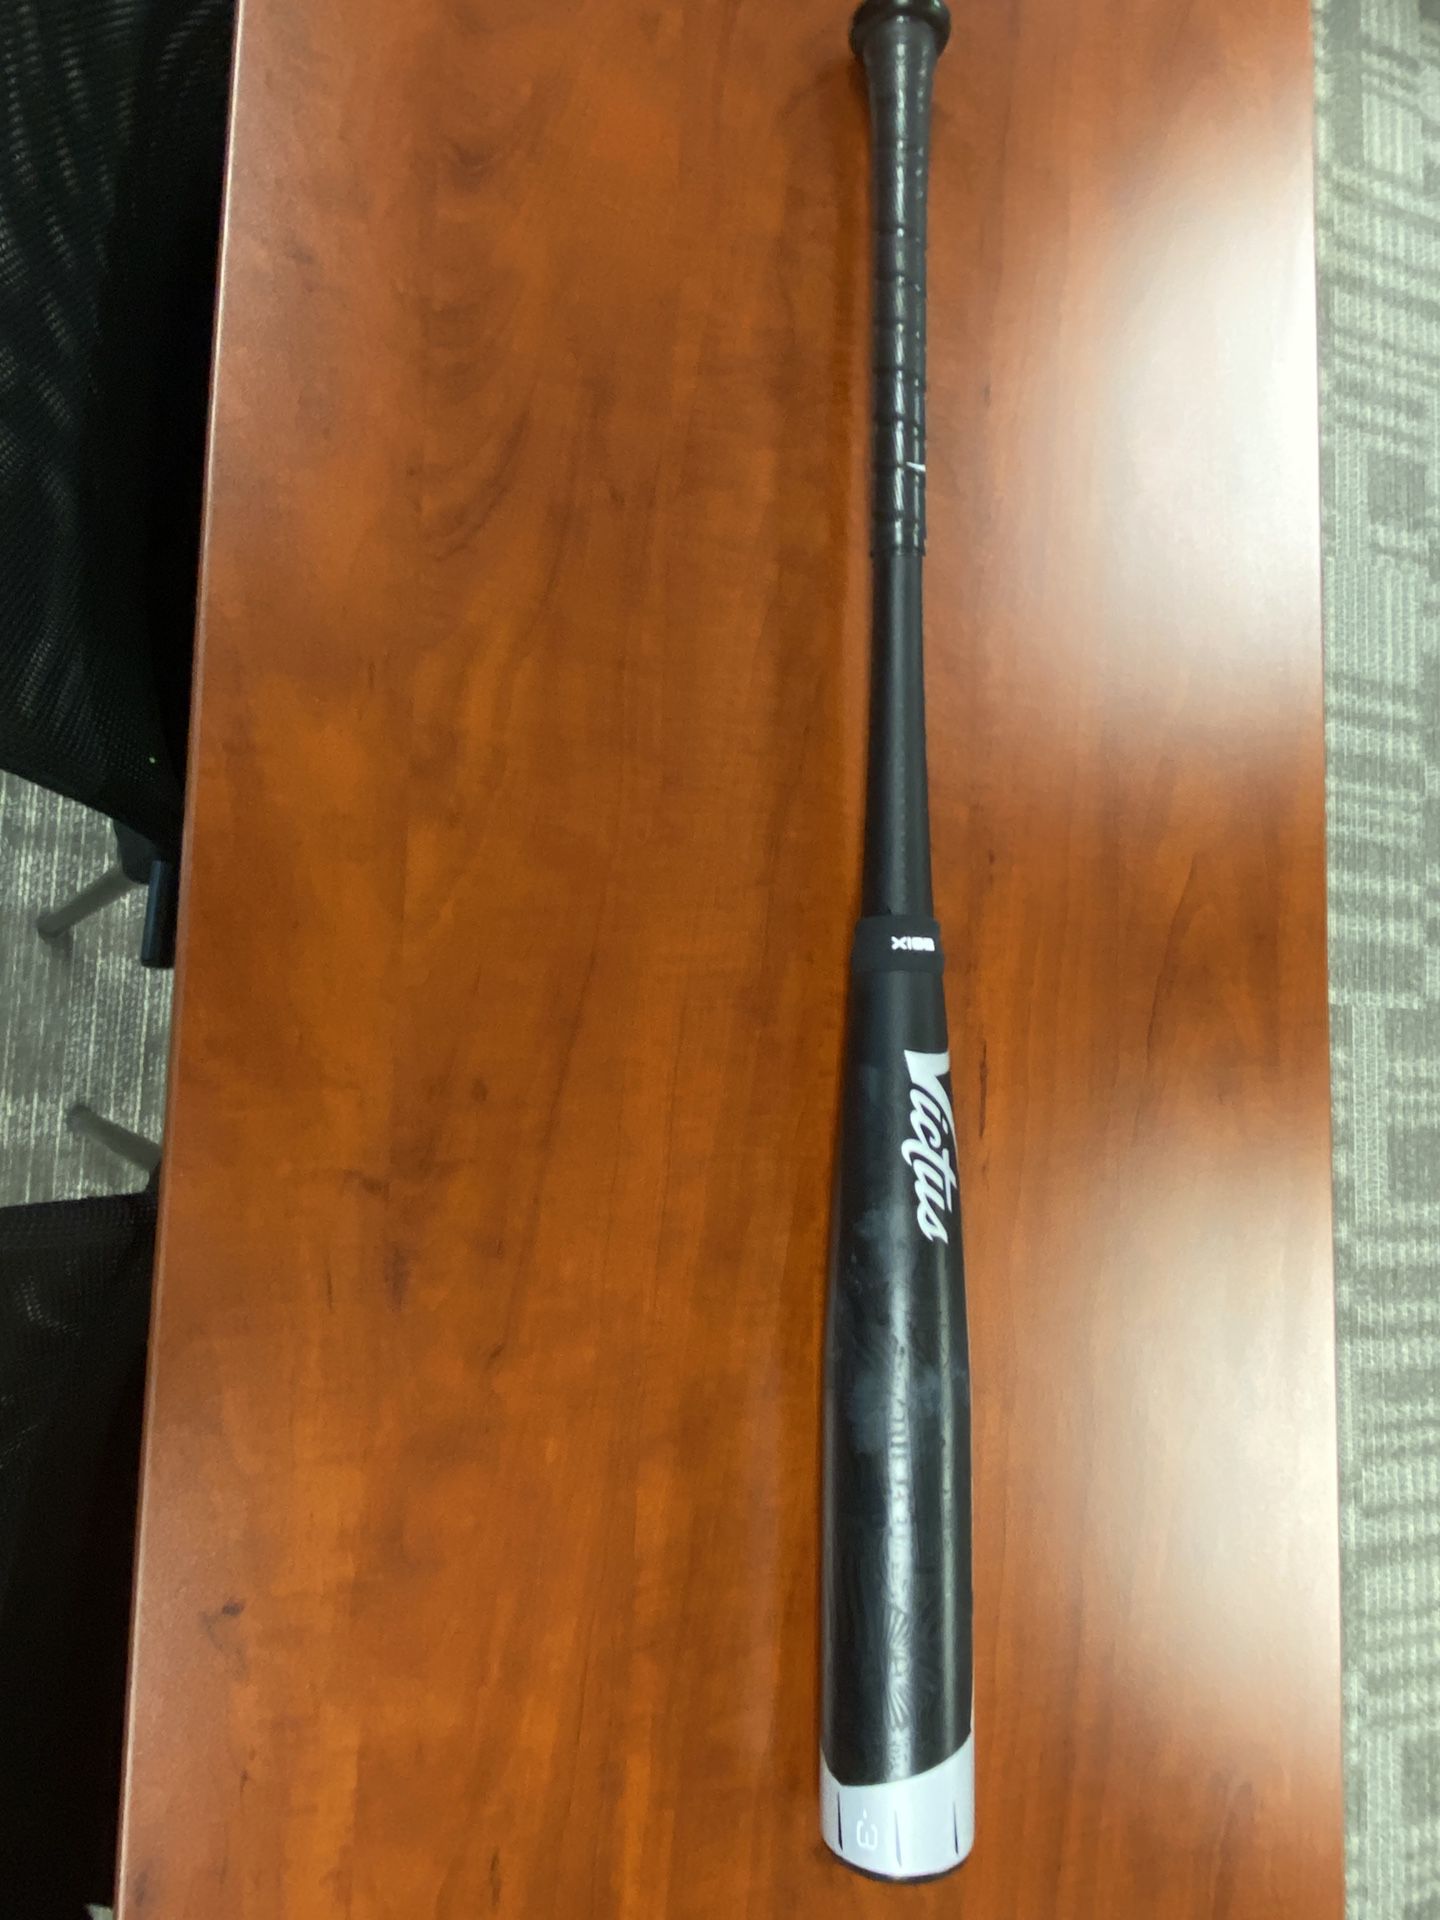 Barely used Victus Nox 33/30 BBCOR Baseball Bat. Son Used Once In Batting Practice. 